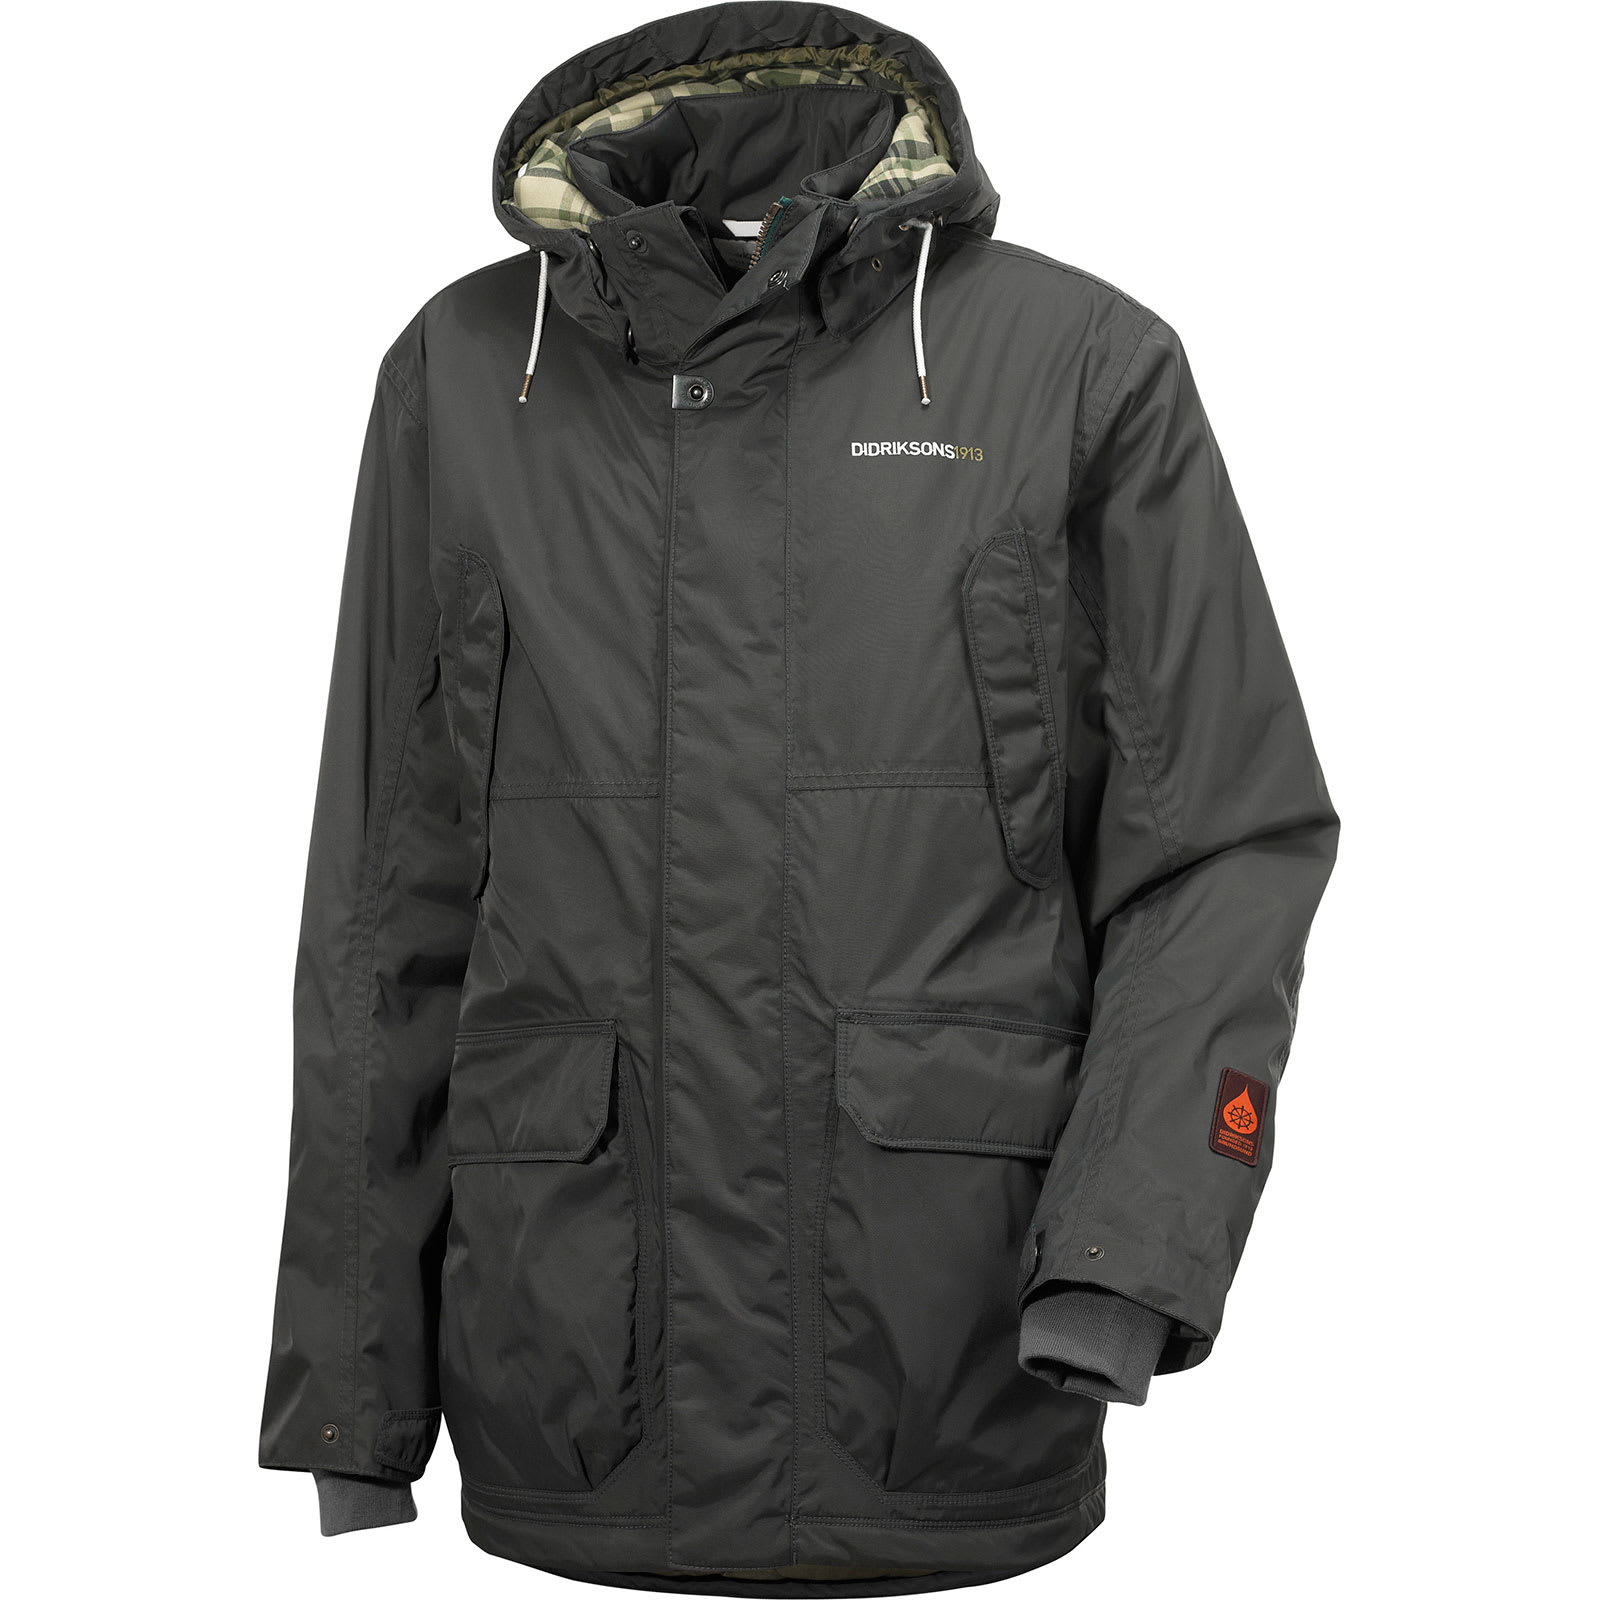 Buy Didriksons Samuel Men's Parka from Outnorth